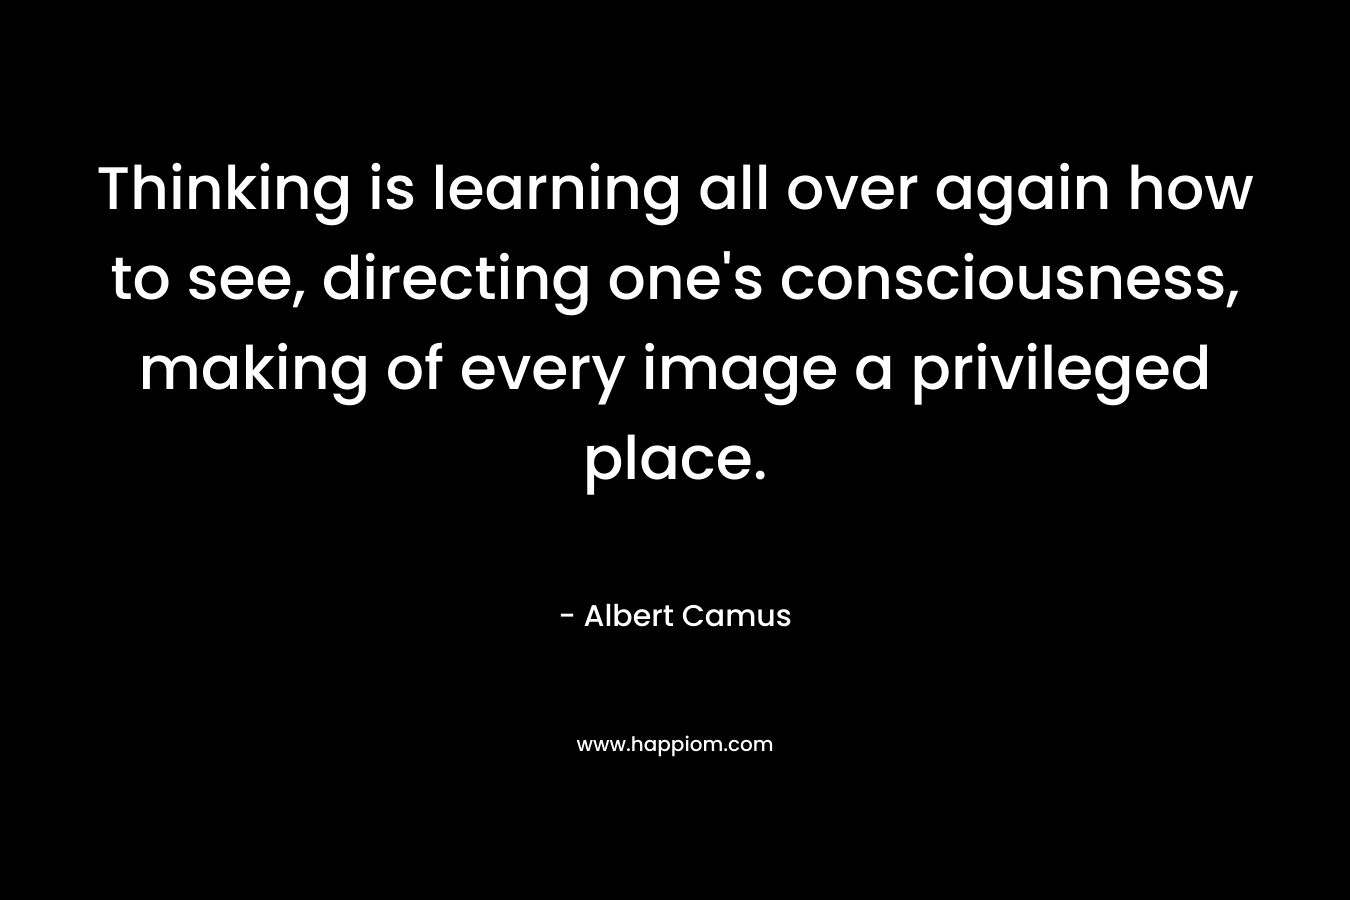 Thinking is learning all over again how to see, directing one’s consciousness, making of every image a privileged place. – Albert Camus